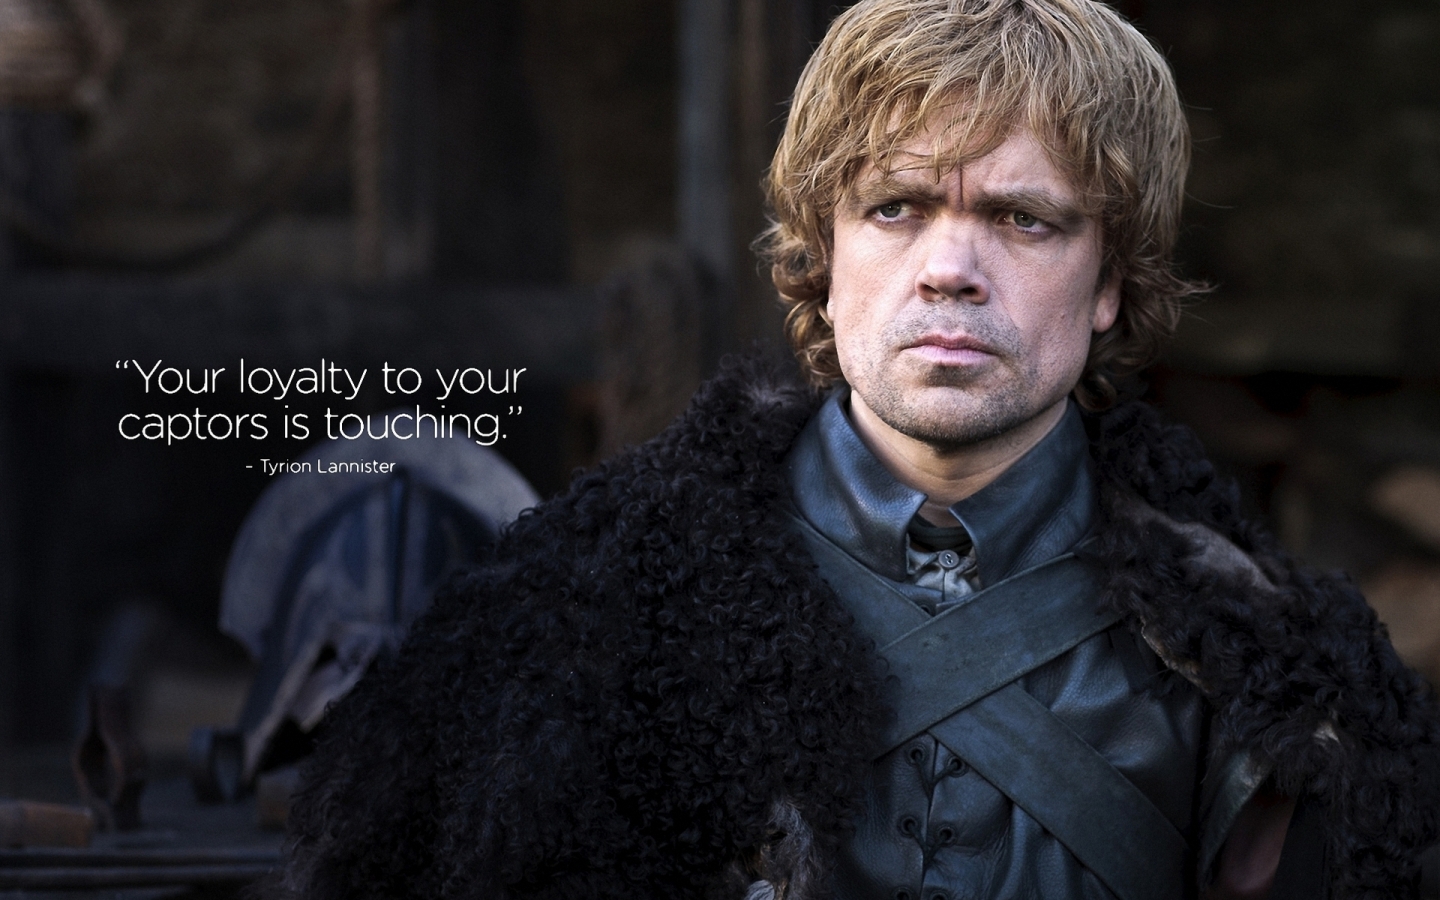 Tyrion Lannister Quote Game of Thrones for 1440 x 900 widescreen resolution